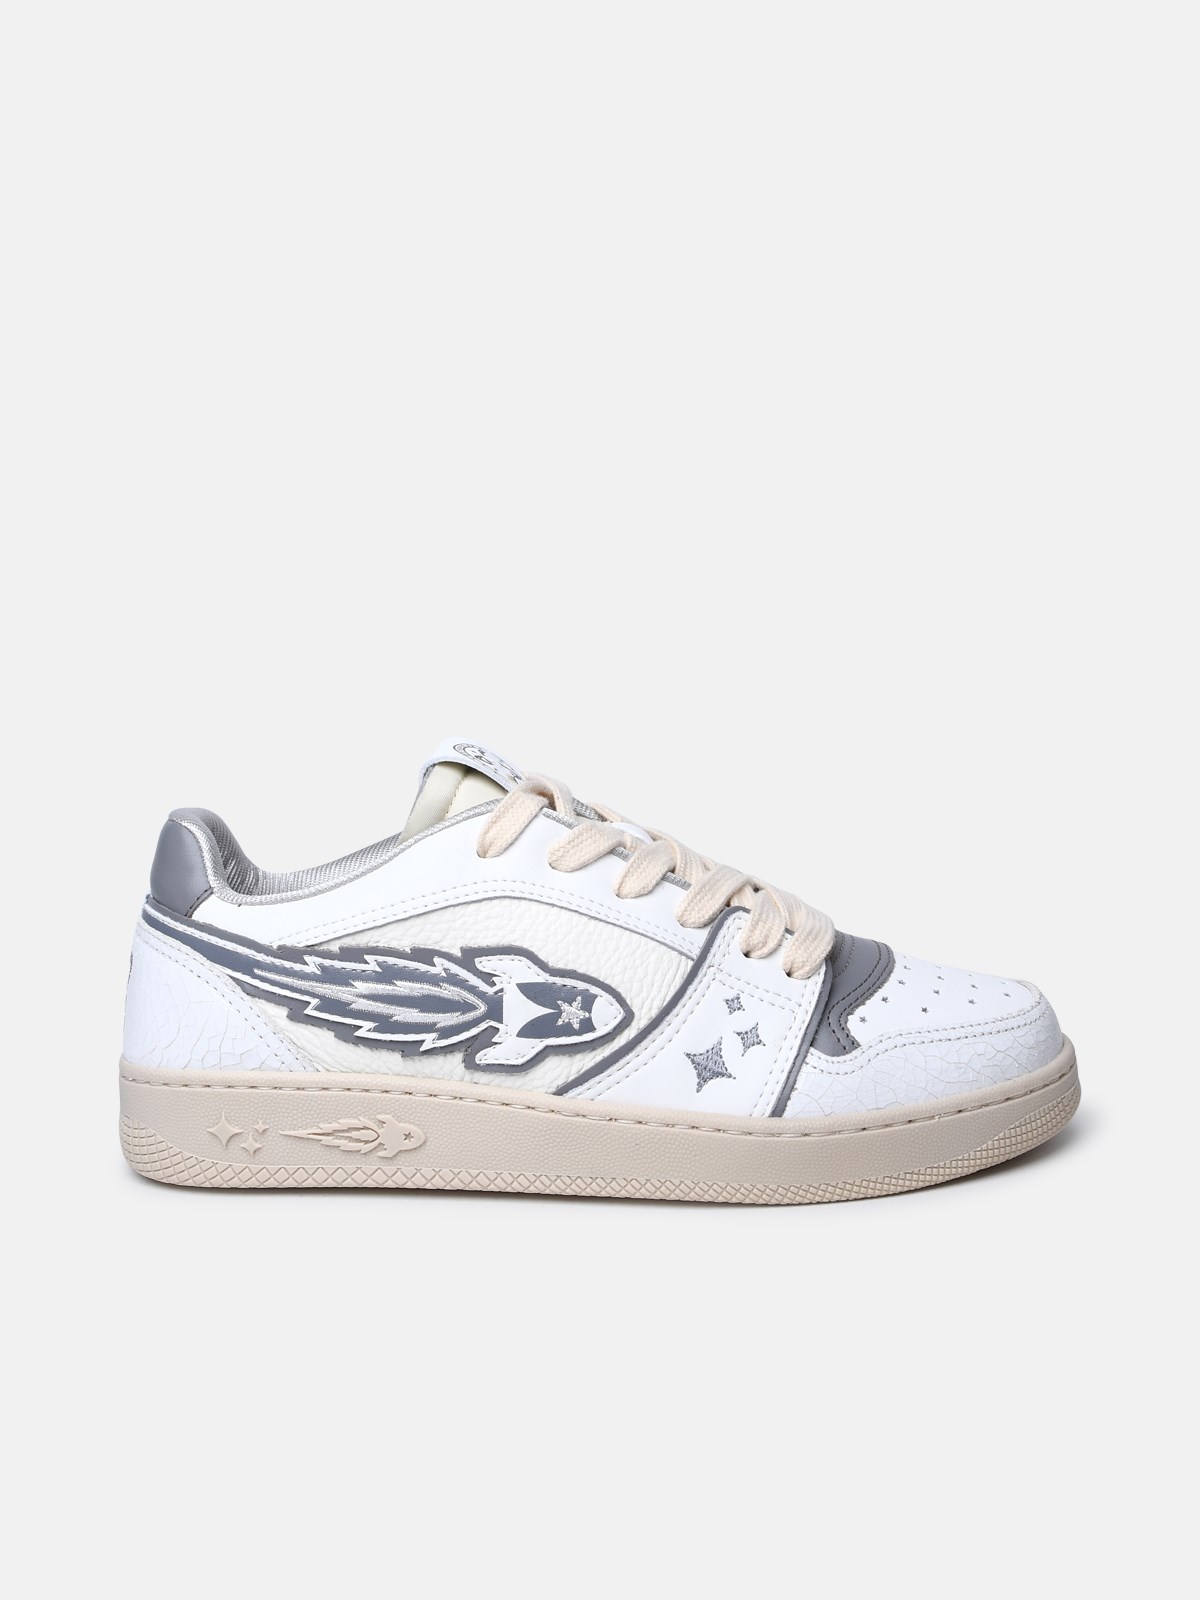 Enterprise Japan Two-tone Leather Sneakers In White